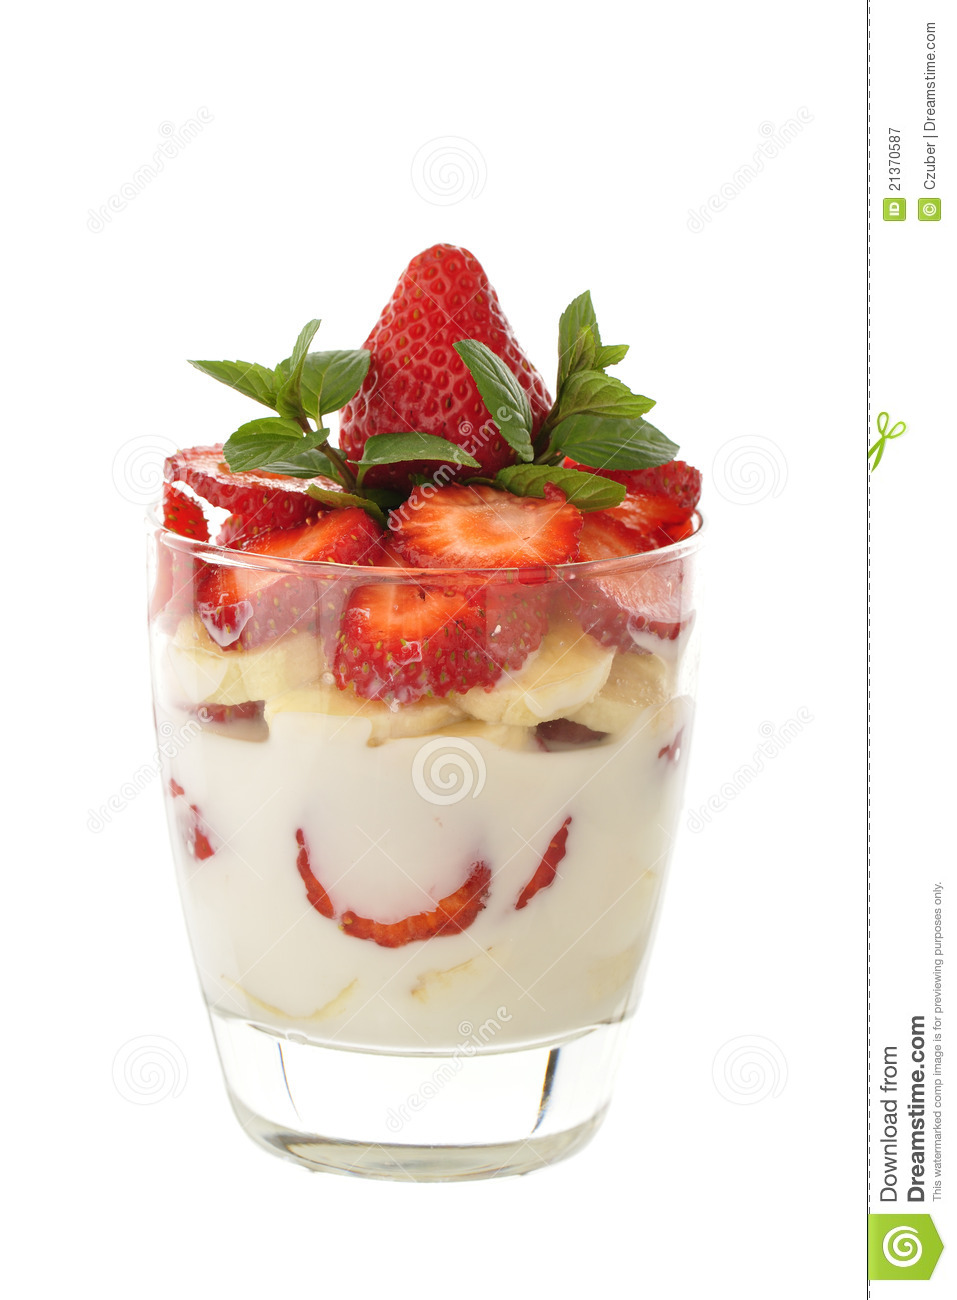 Fruit Cup Royalty Free Stock Photography   Image  21370587